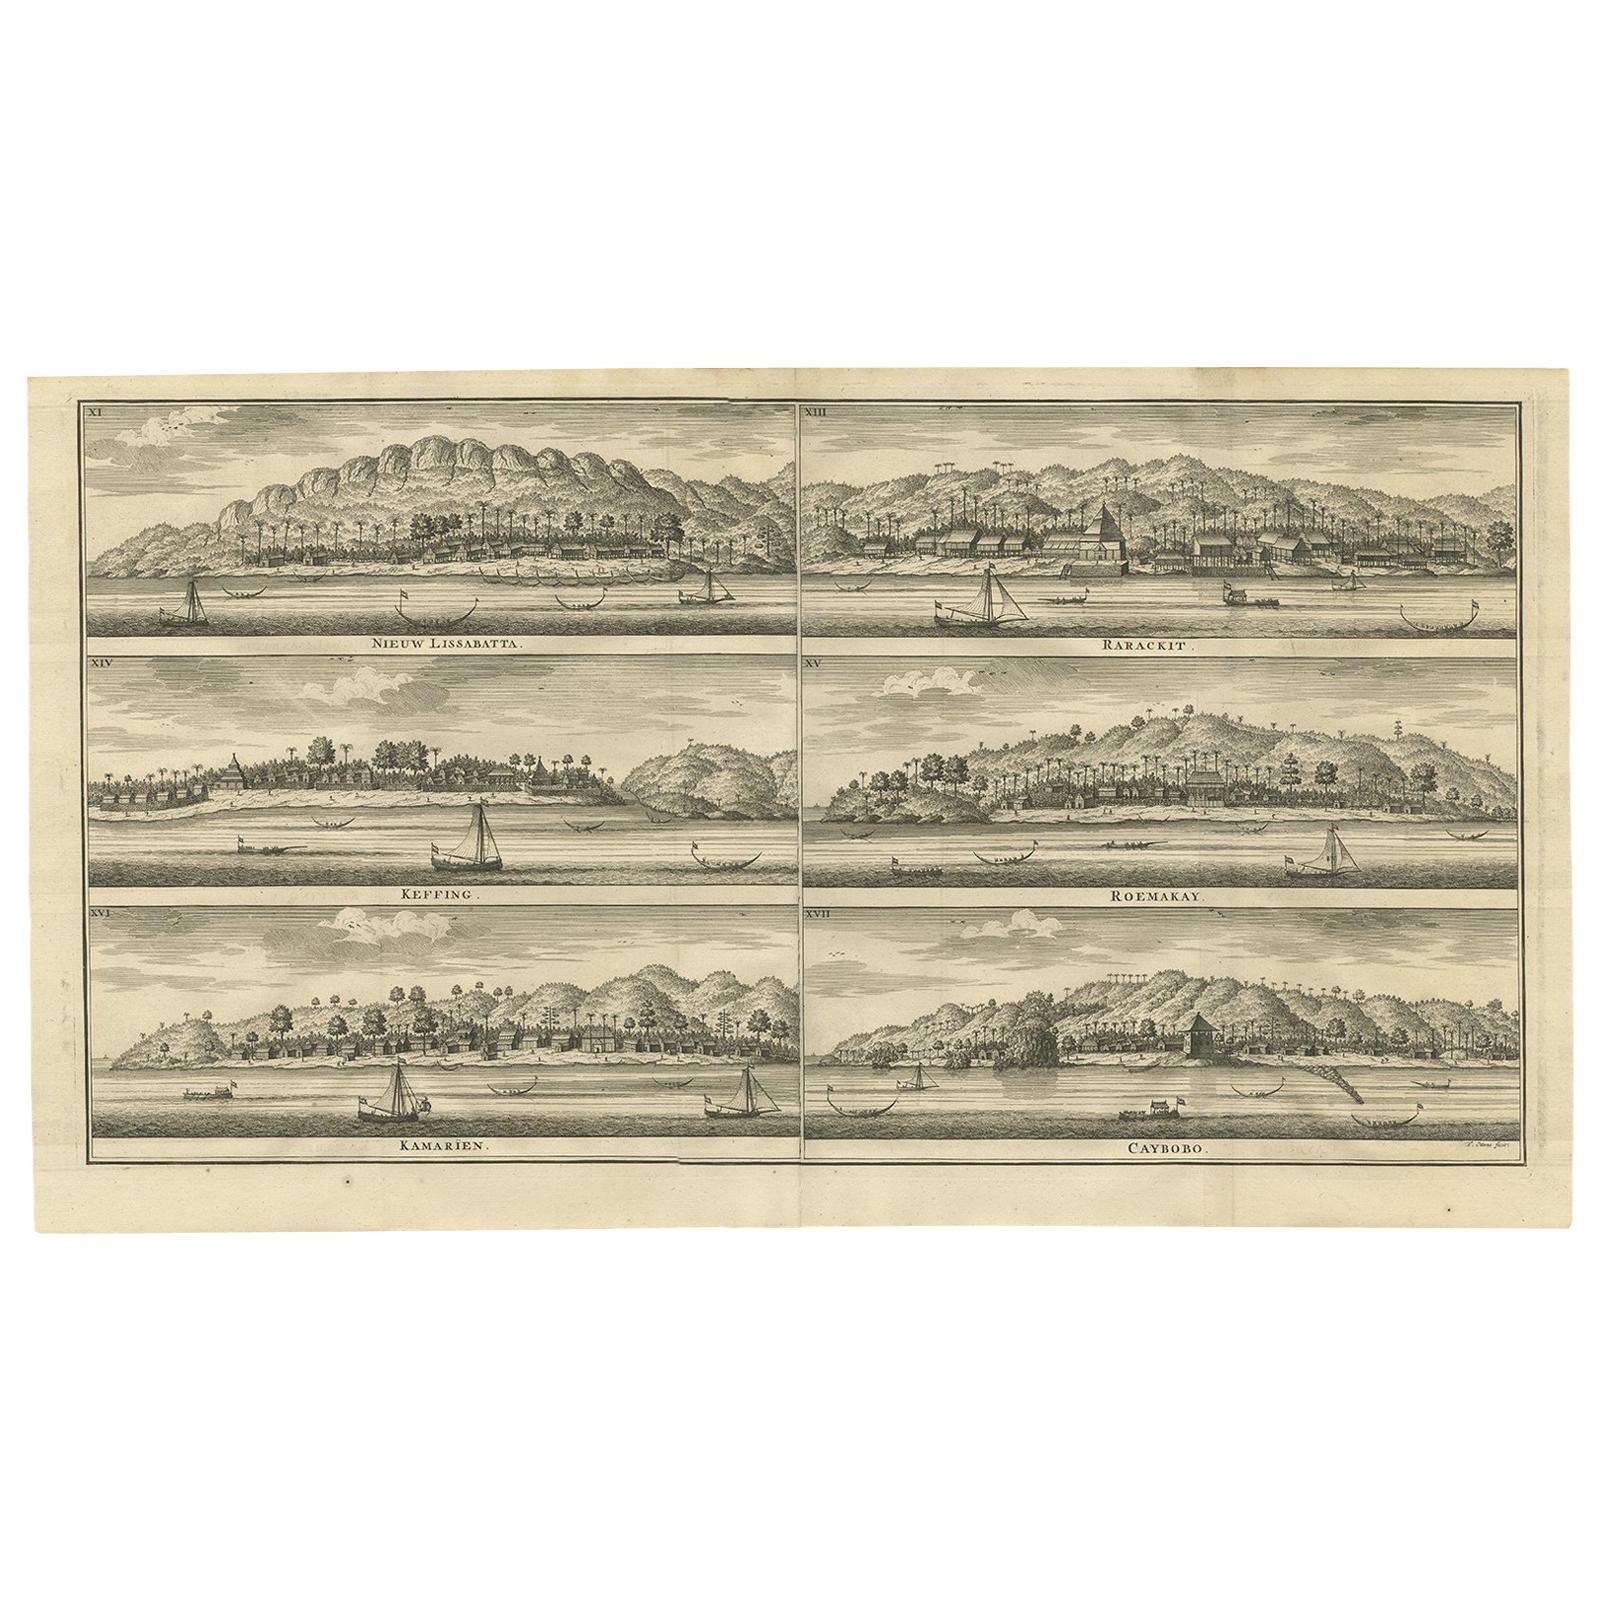 Antique Print of Trading Posts in Indonesia by Valentijn, 1726